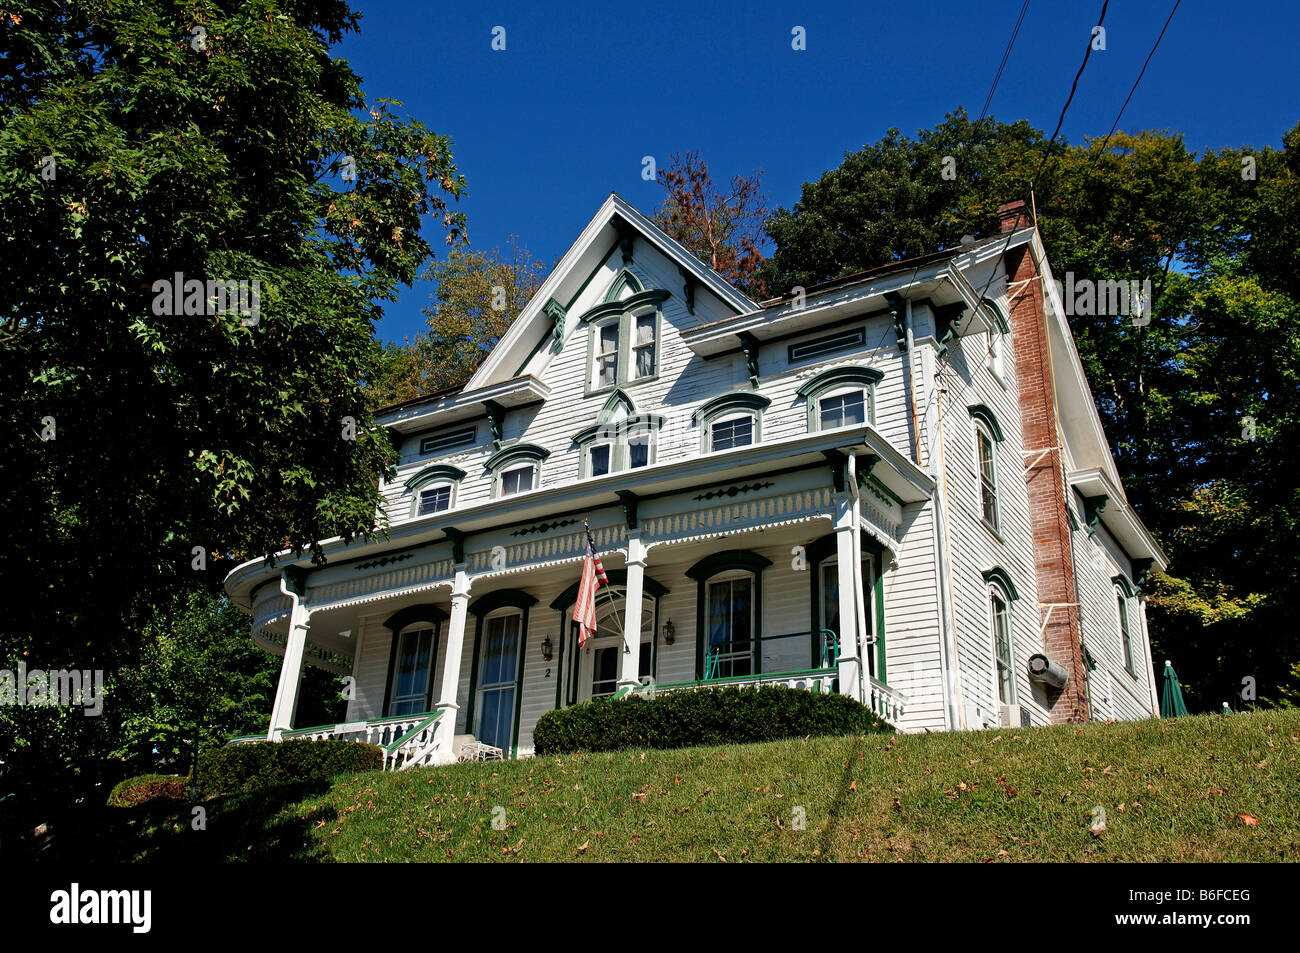 Old settlers house, built from timber, 1900, Blairstown, New Jersey, USA Stock Photo